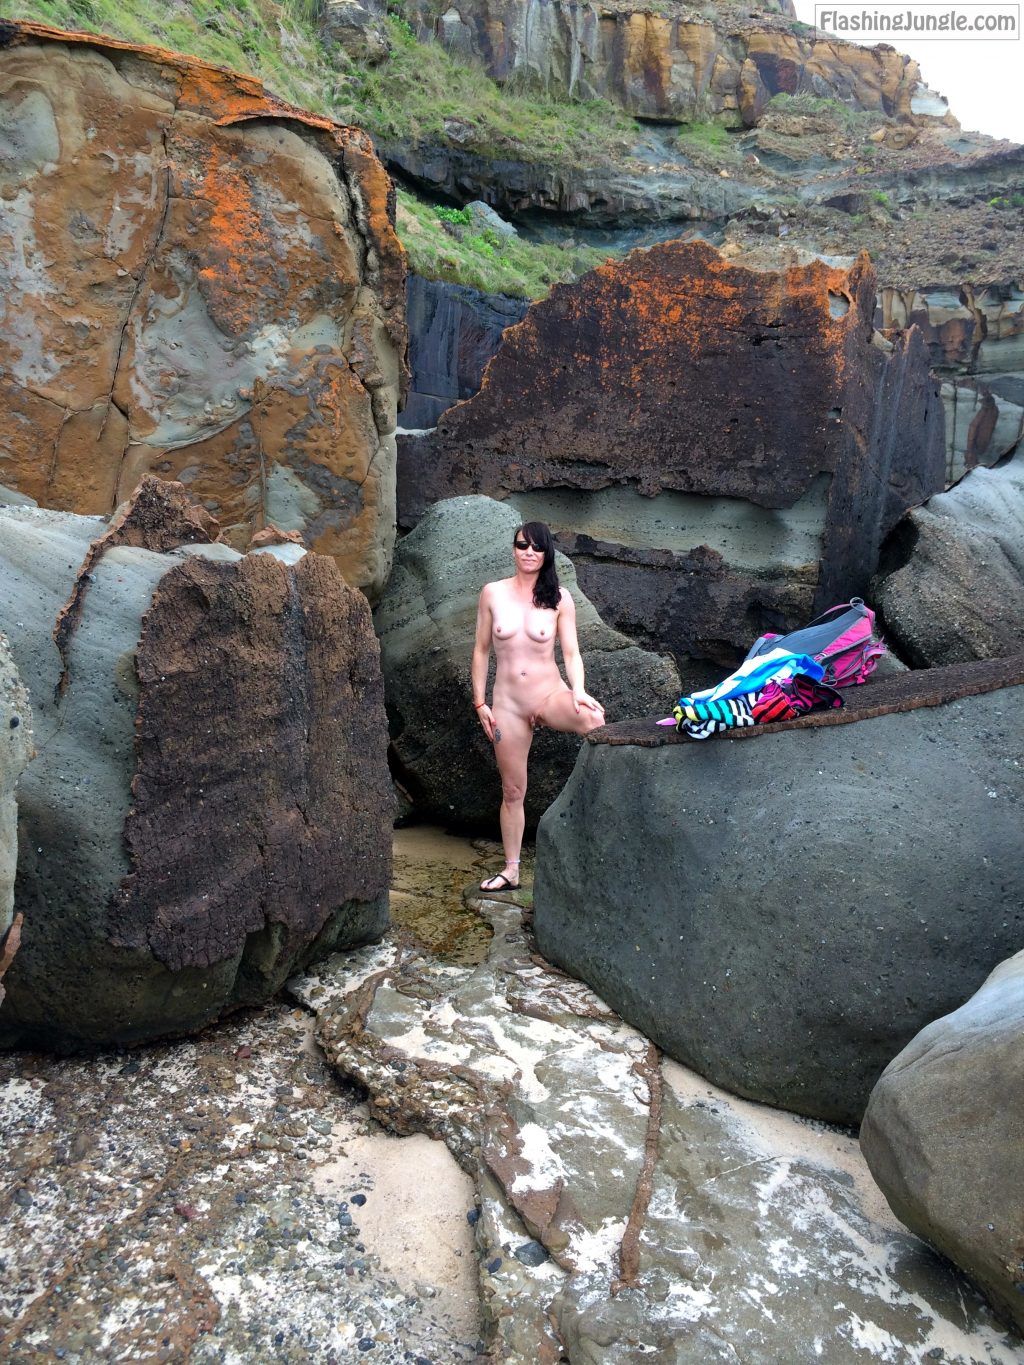 nudes on the beach - Dark haired milf nude beach and sunglasses hot sexy wife stripped down and showing of her sexy shaved pussy and cute little tits for voyeurs on nude beach - Hotwife Pics